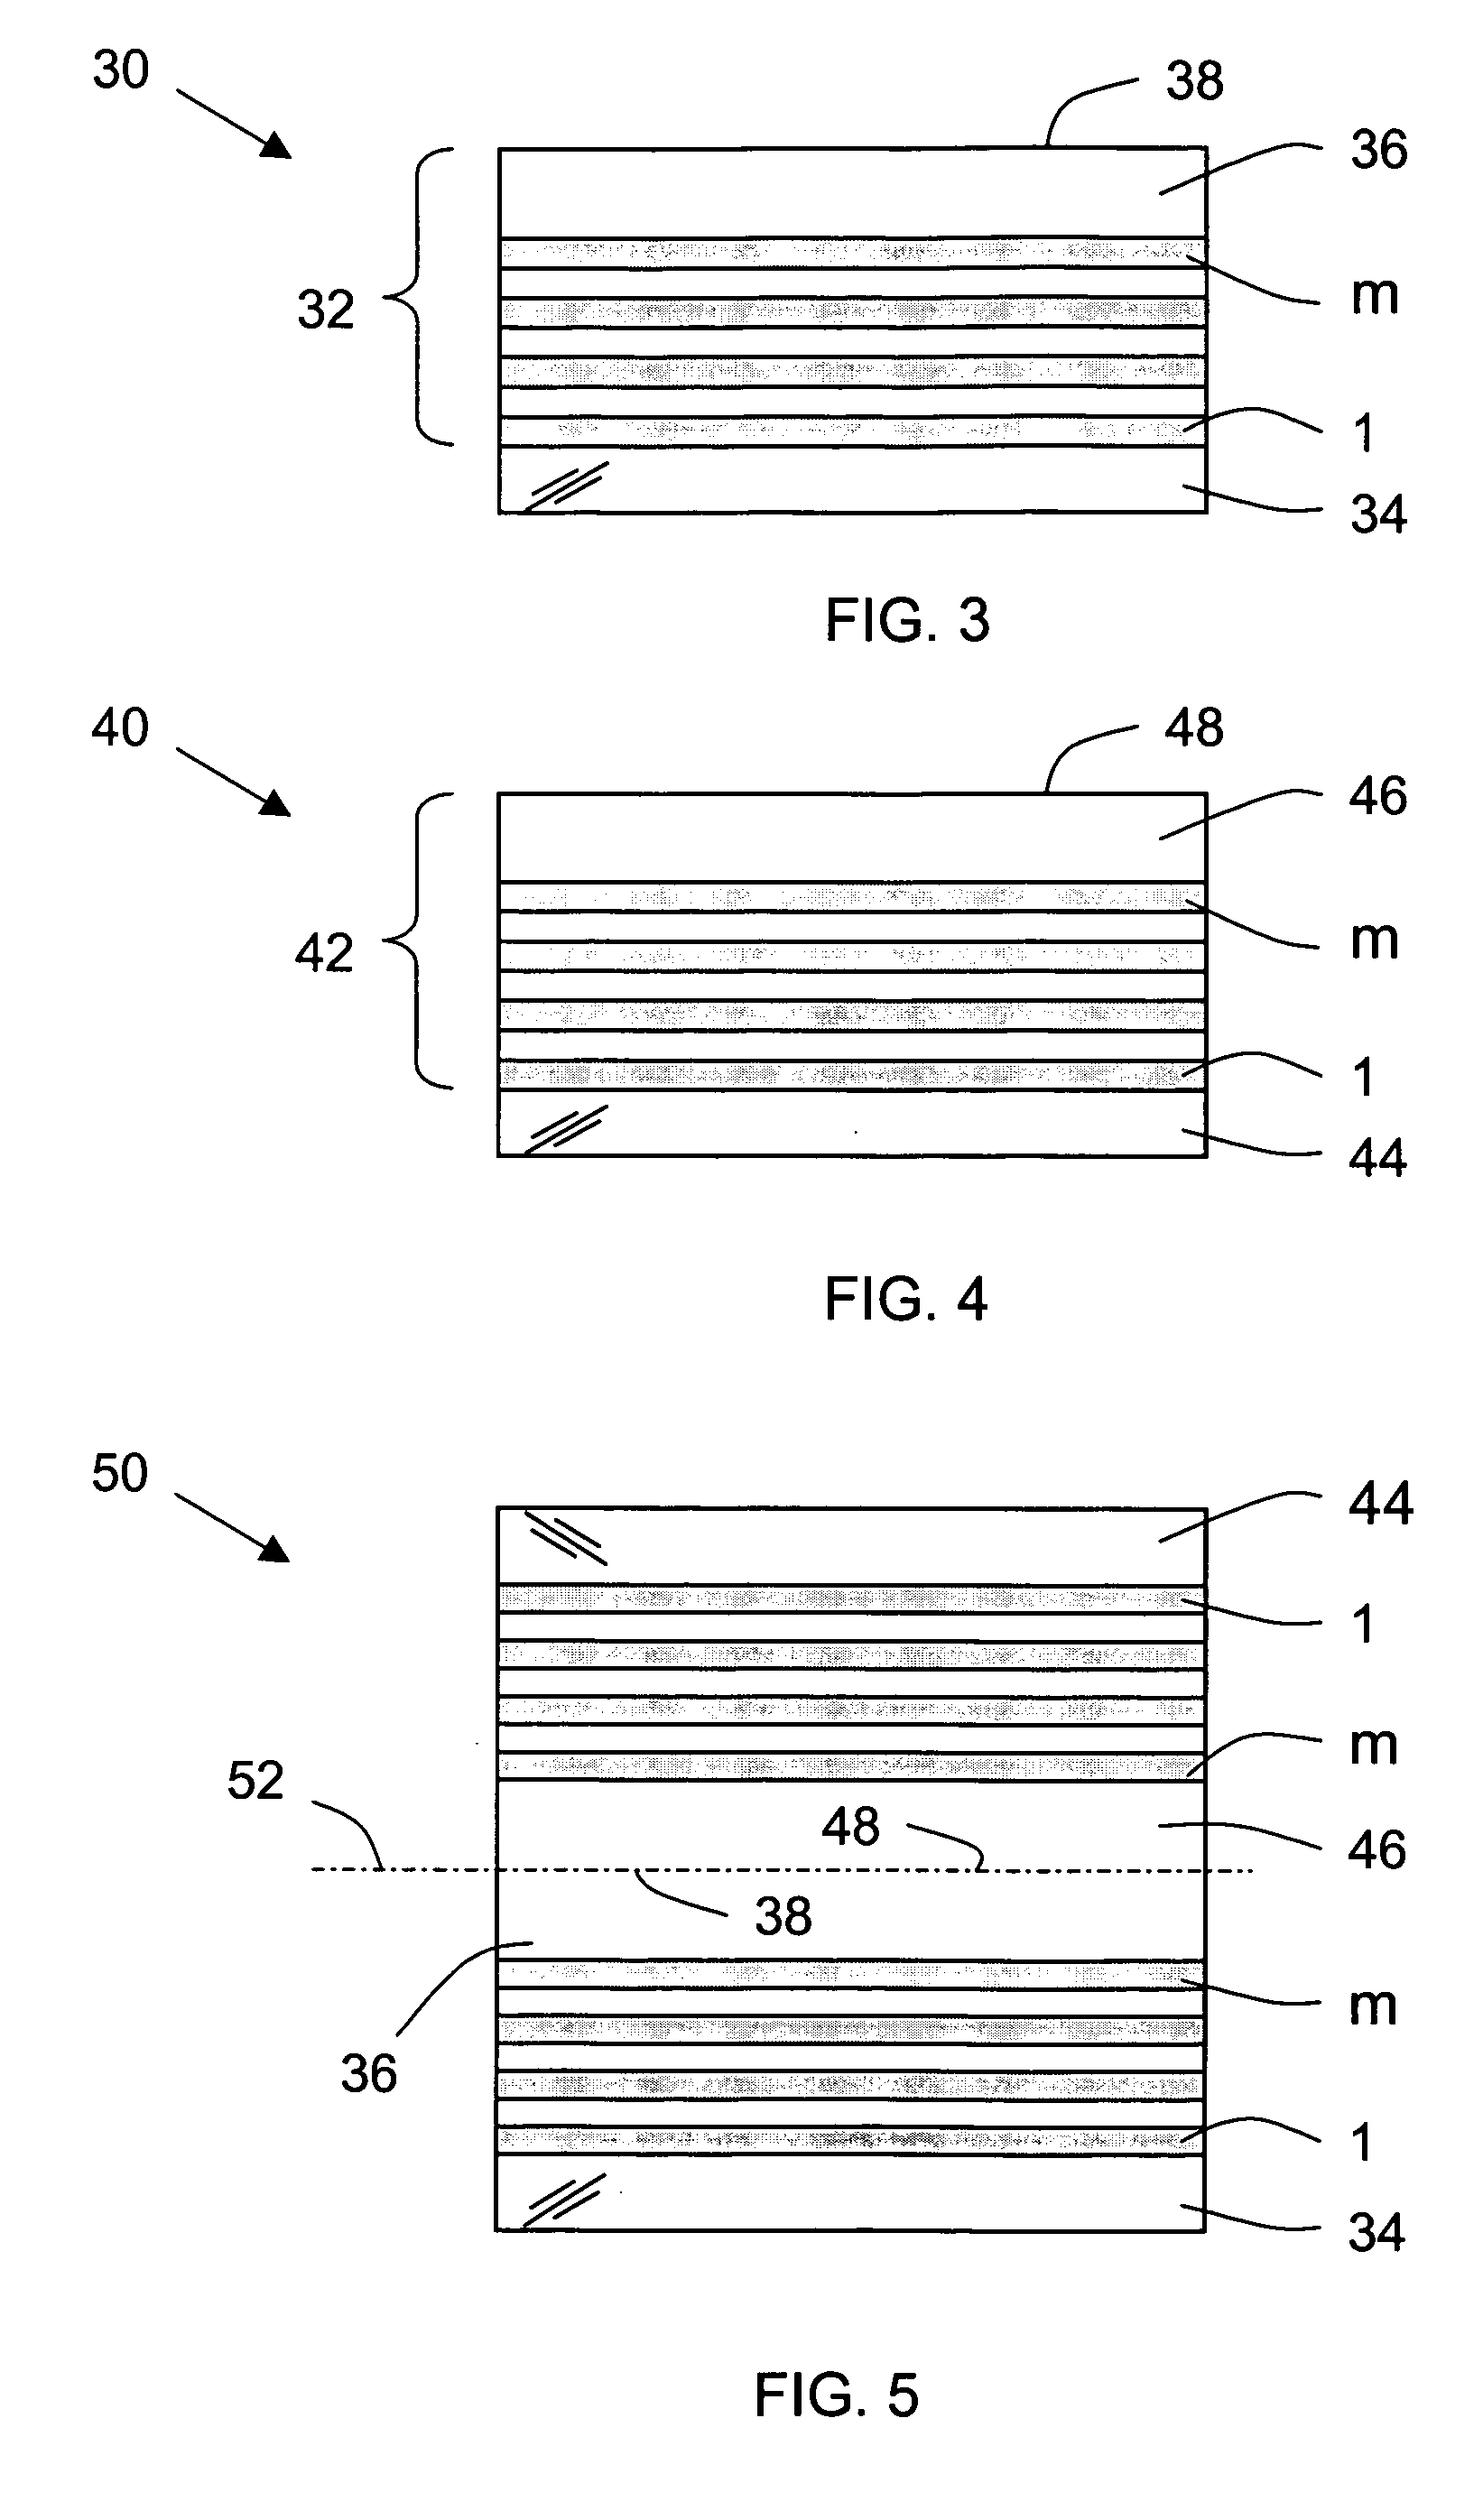 Fabrication of narrow-band thin-film optical filters